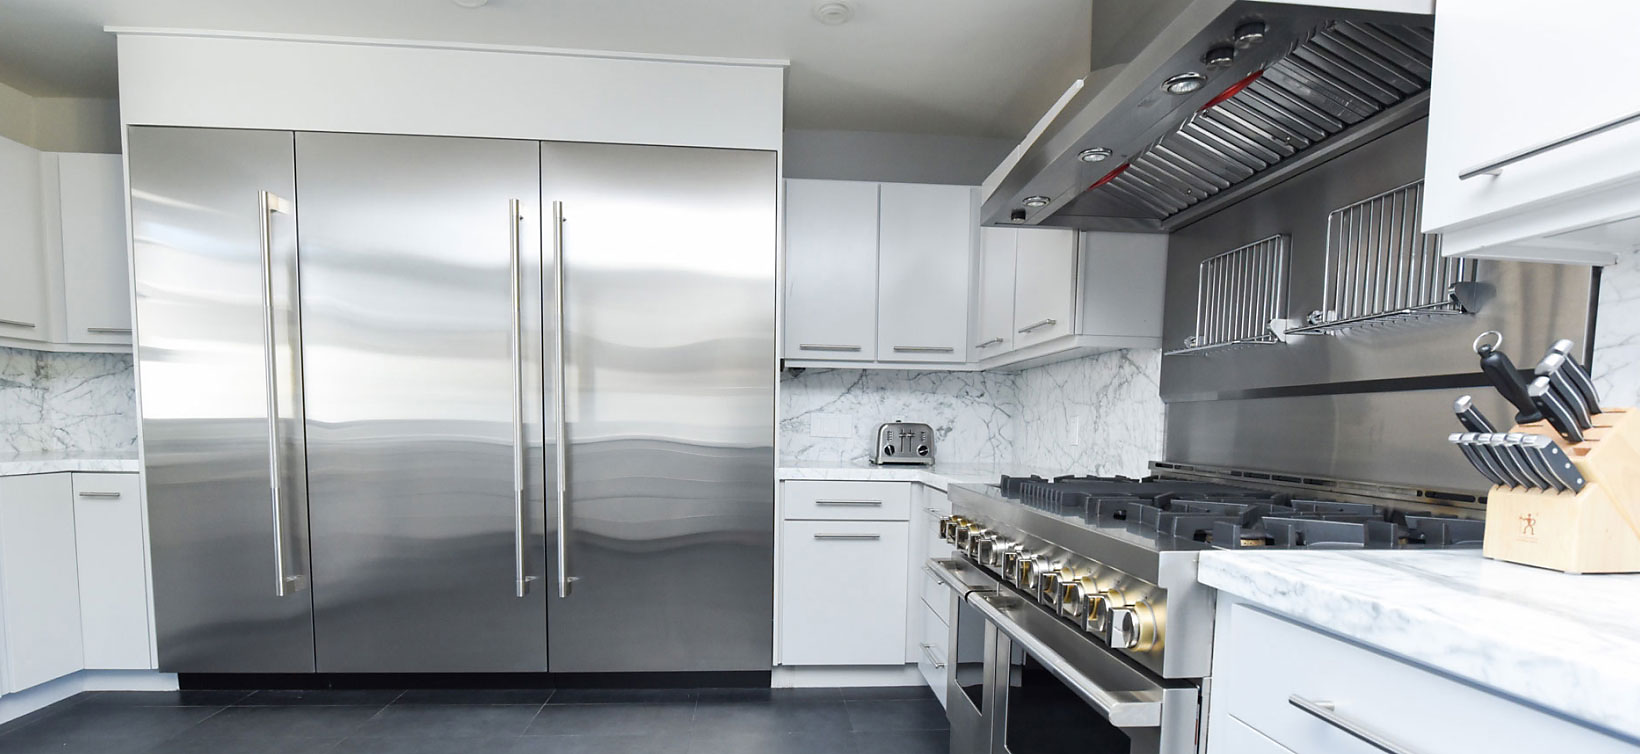 JennAir column refrigerators and freezers in a bright modern kitchen with a JennAir range and ventilation system. 